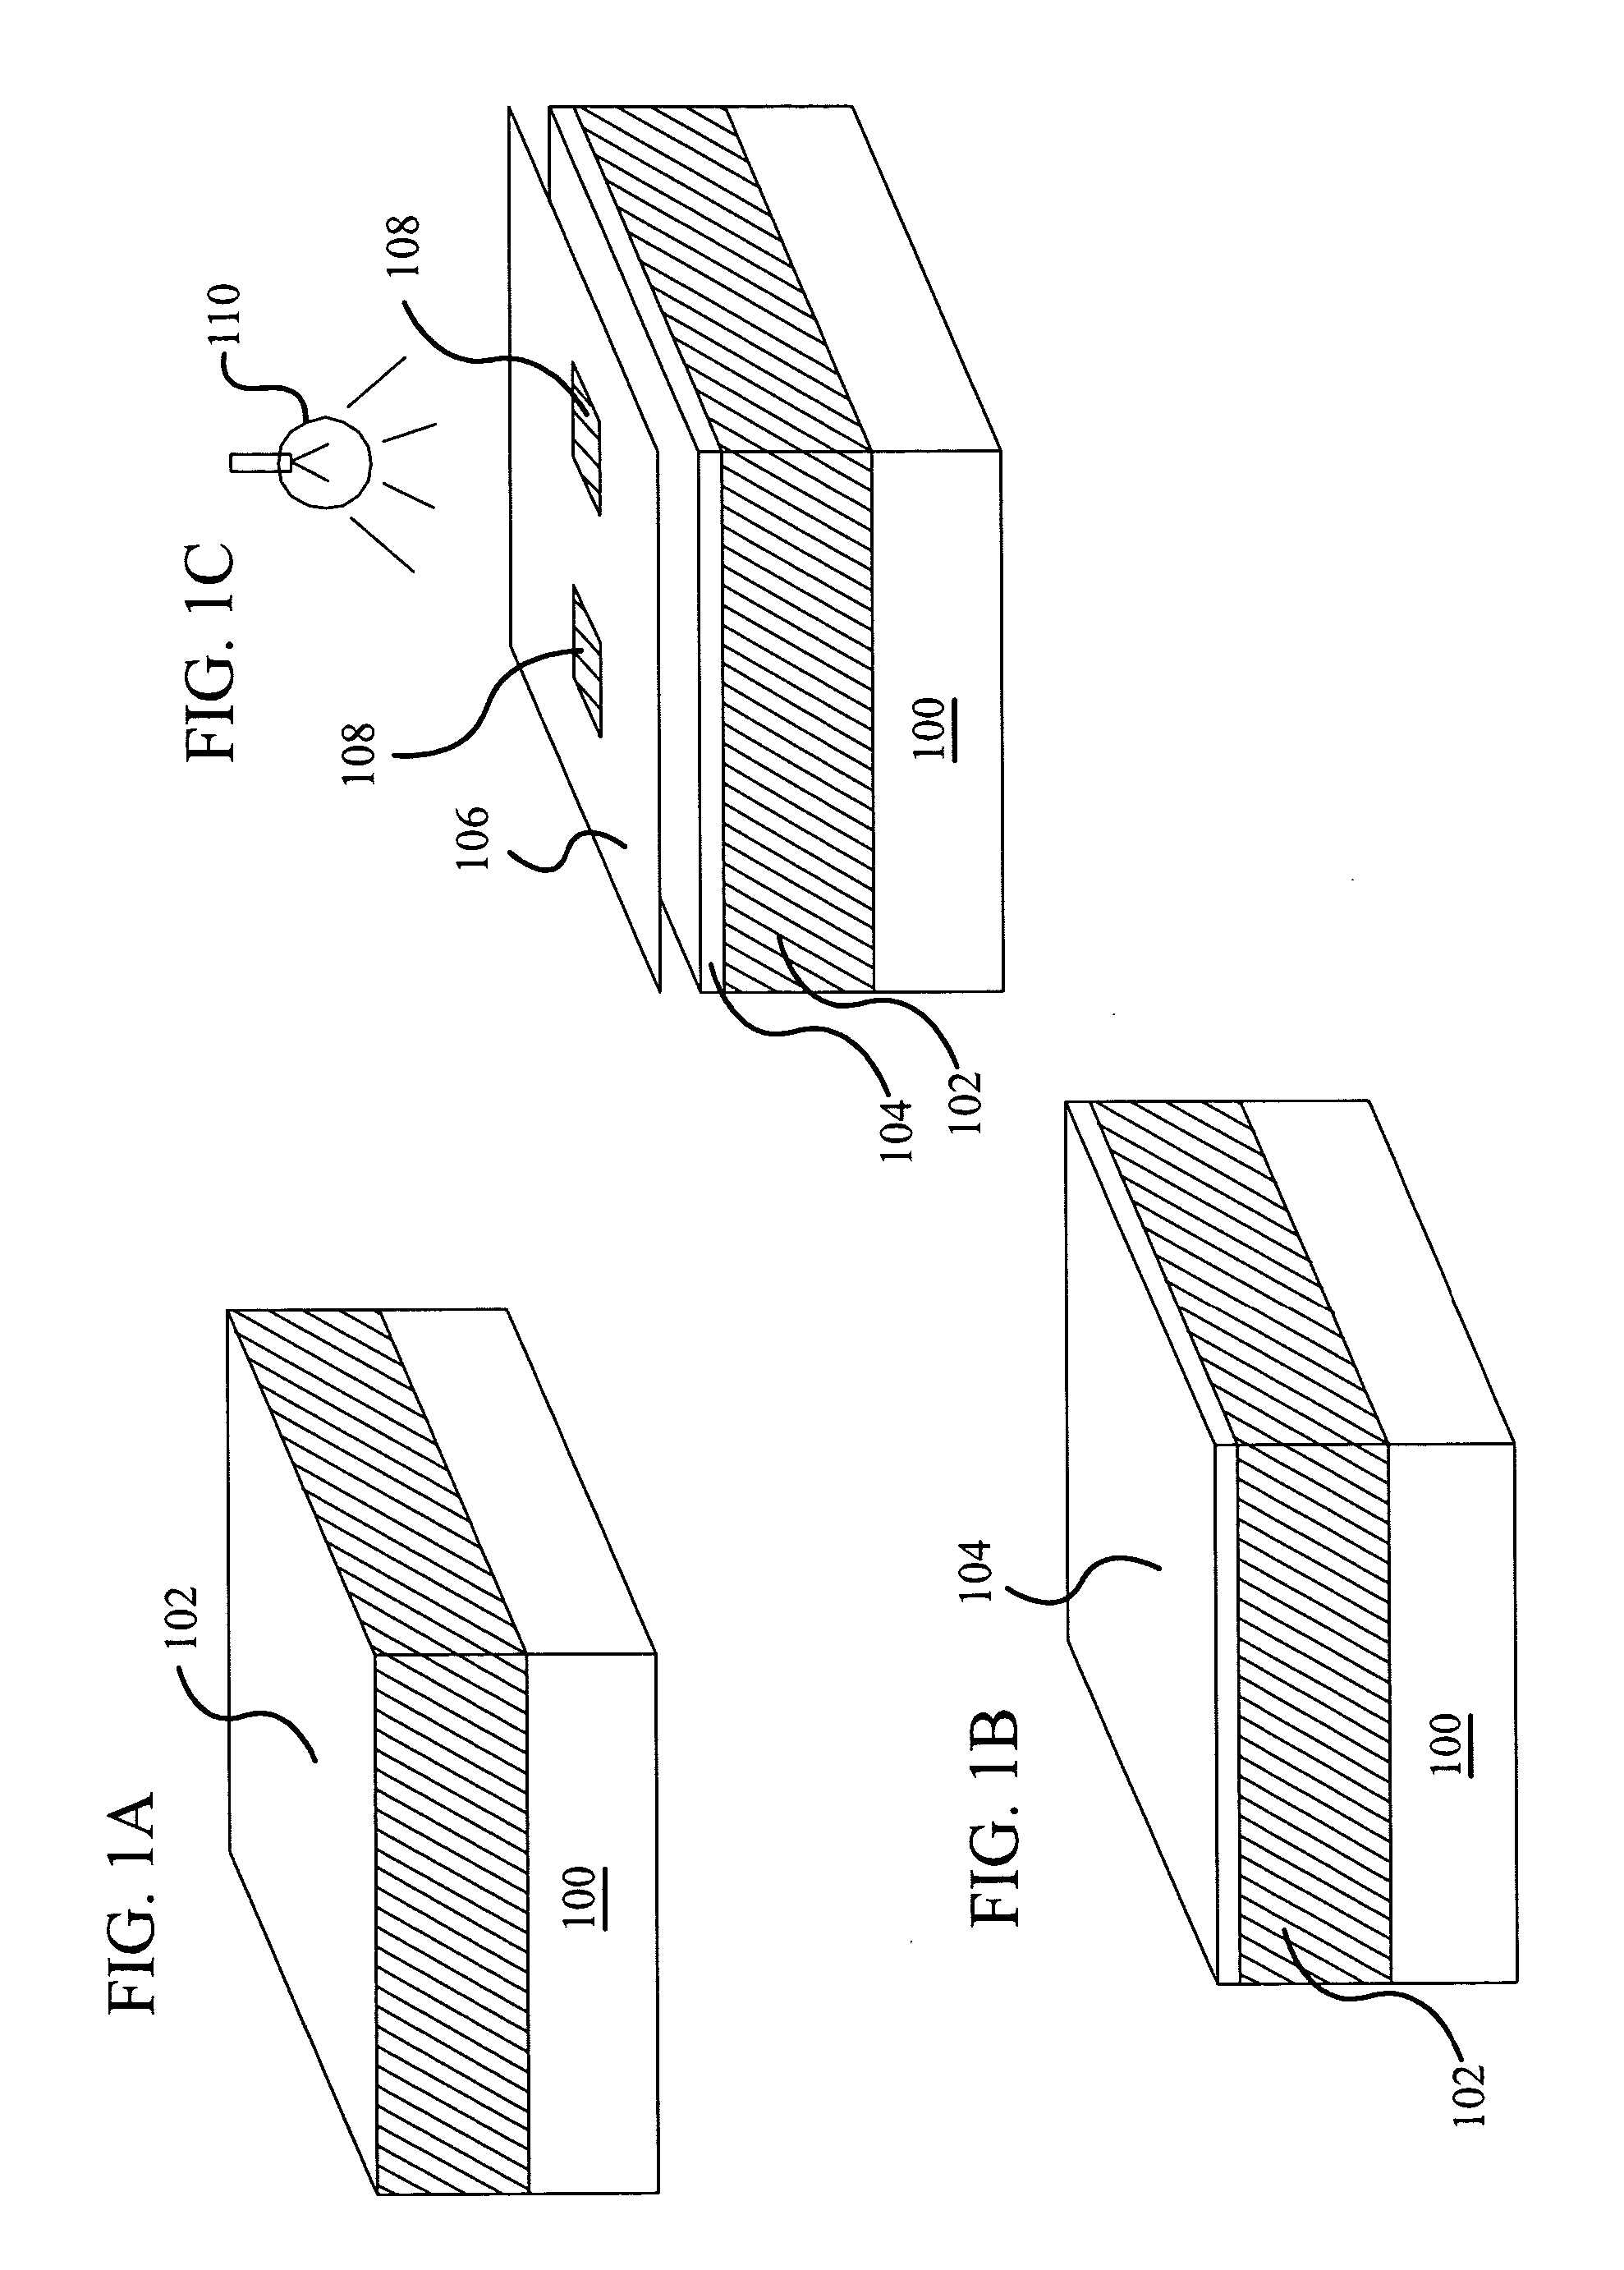 Process for making angled features for nanolithography and nanoimprinting